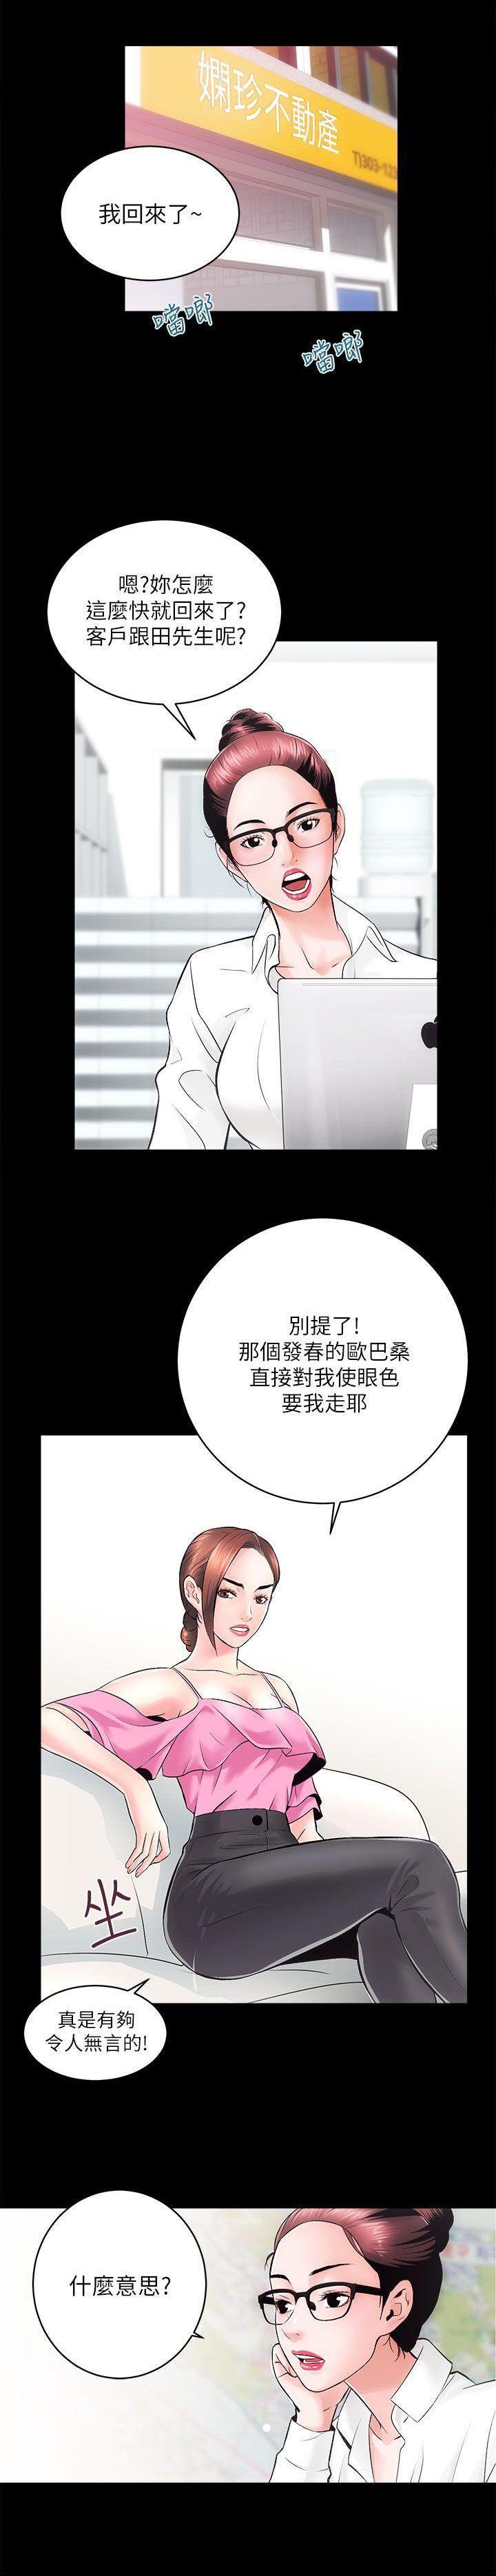 Moms 性溢房屋 Chapter 5-8 Girls Getting Fucked - Page 11